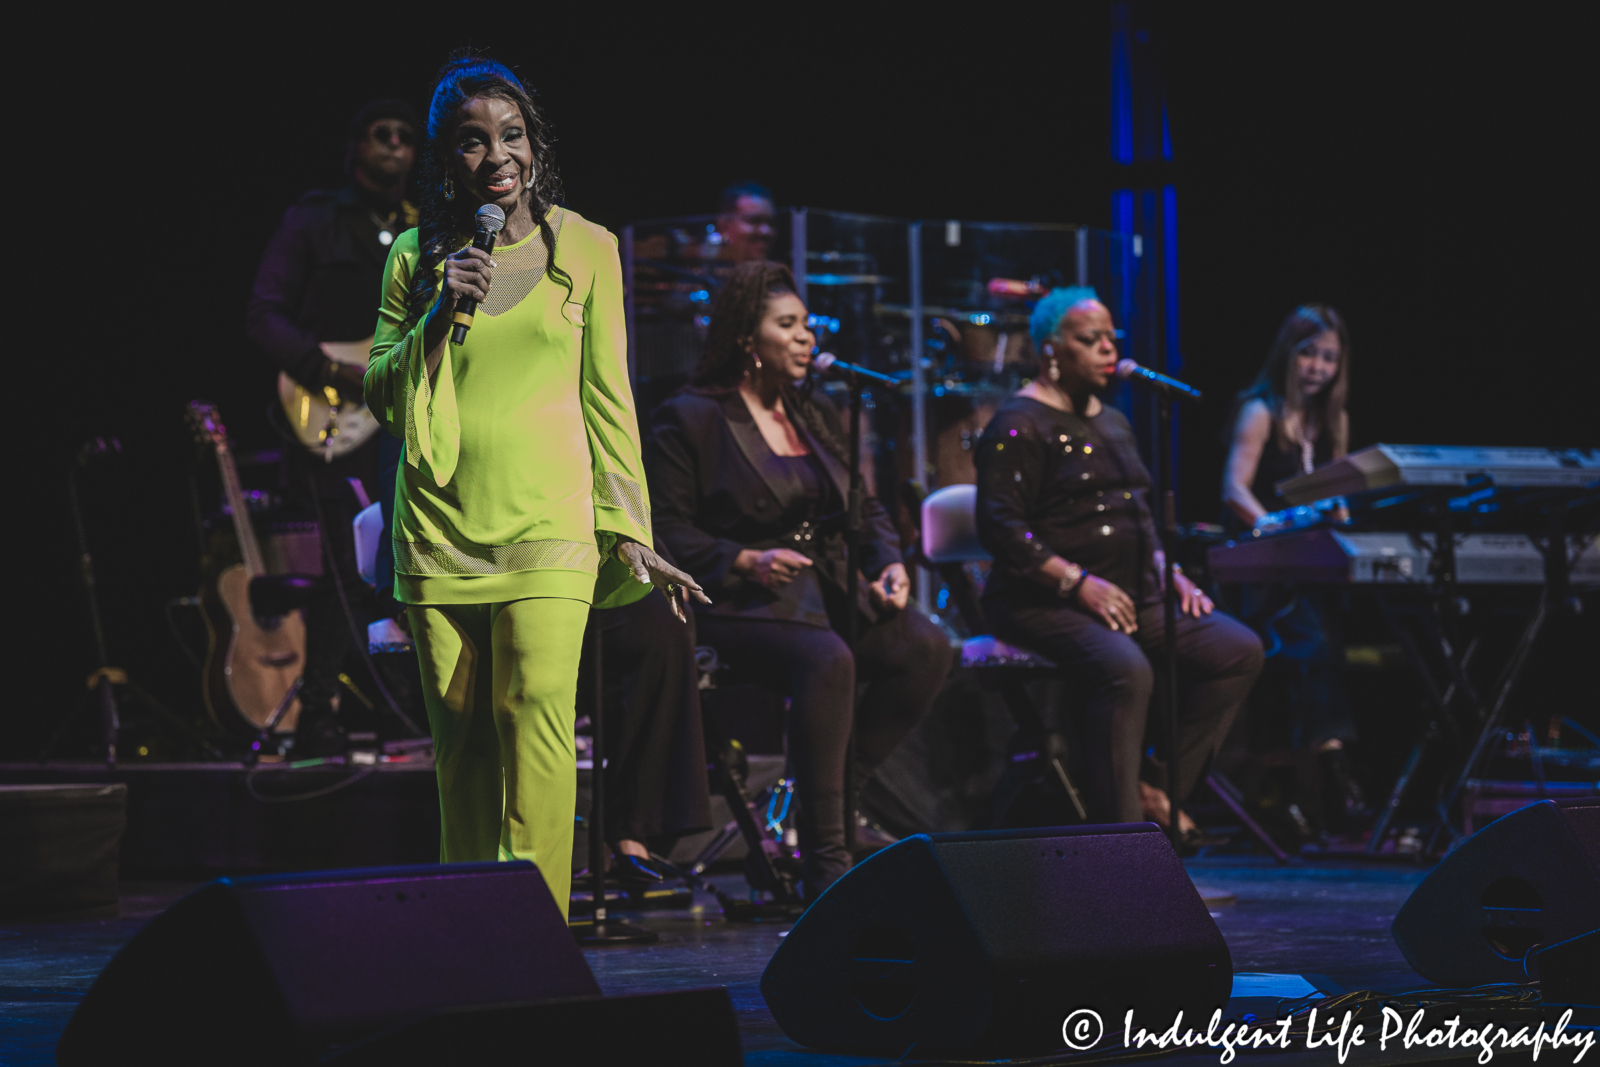 Live concert at Kauffman Center for the Performing Arts in downtown Kansas City, MO featuring the "Empress of Soul" Gladys Knight on November 19, 2023.